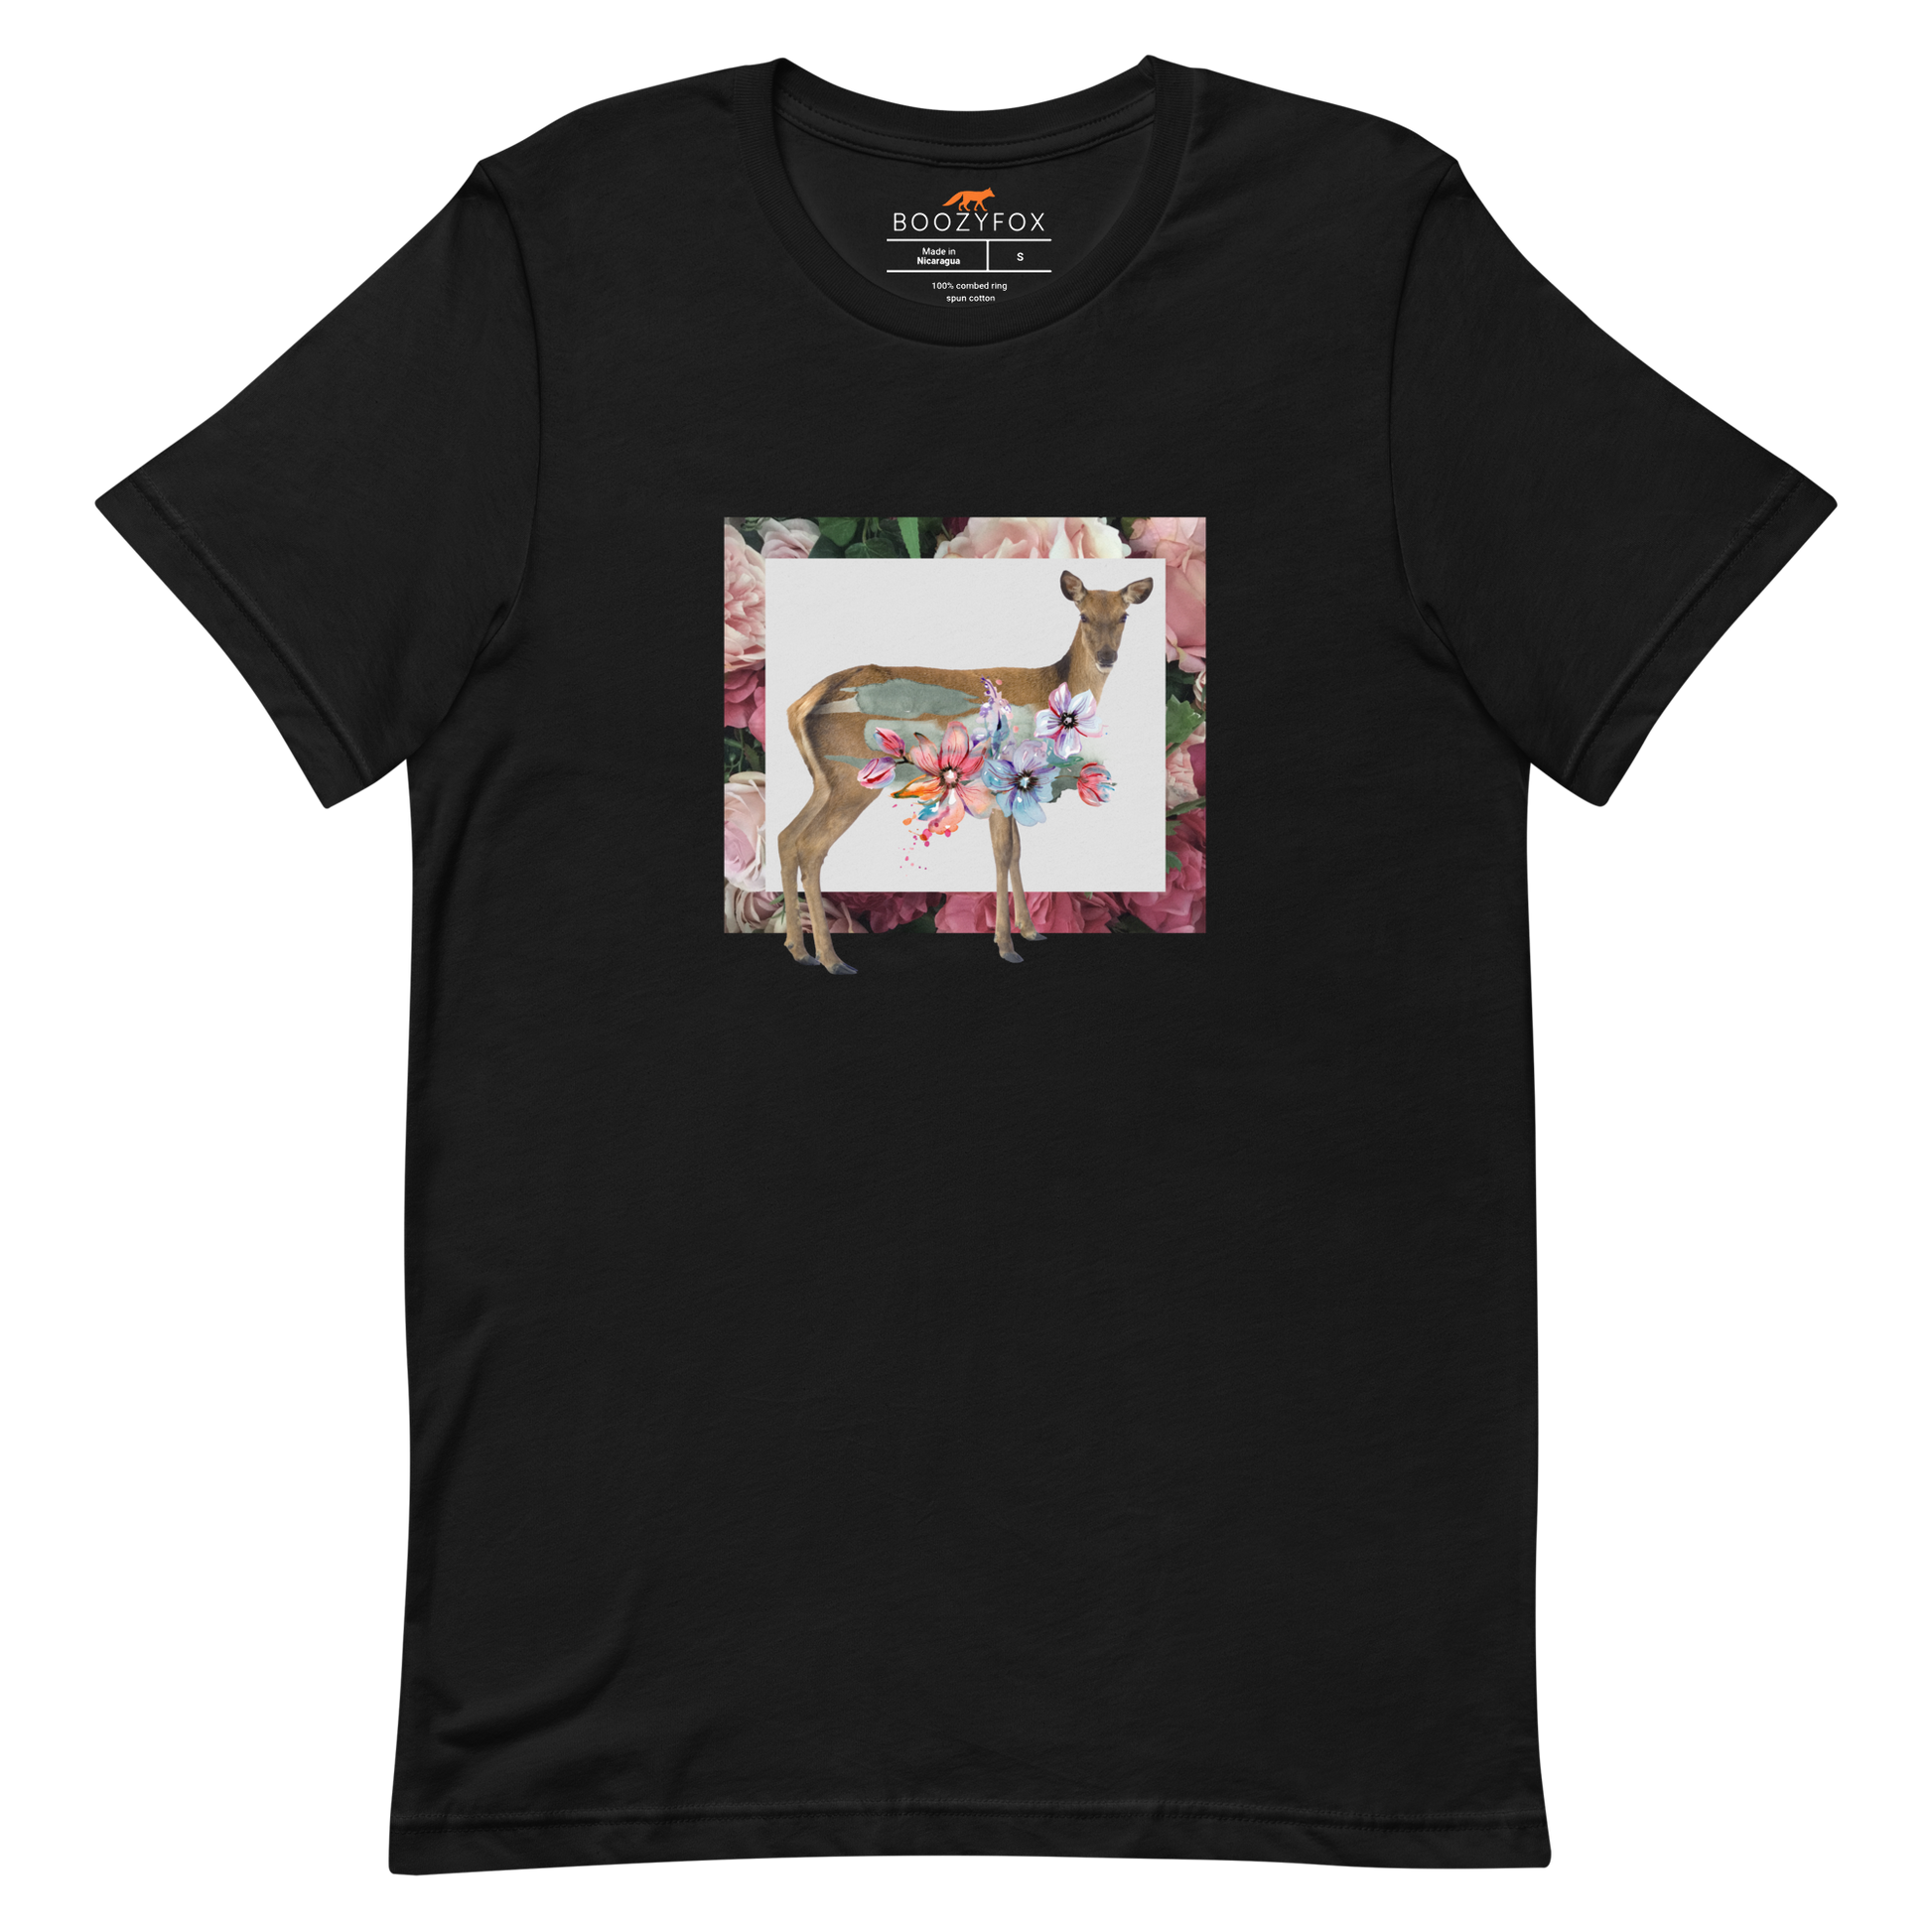 Black Premium Deer T-Shirt featuring a stunning Floral Deer graphic on the chest - Cute Graphic Deer Tees - Boozy Fox